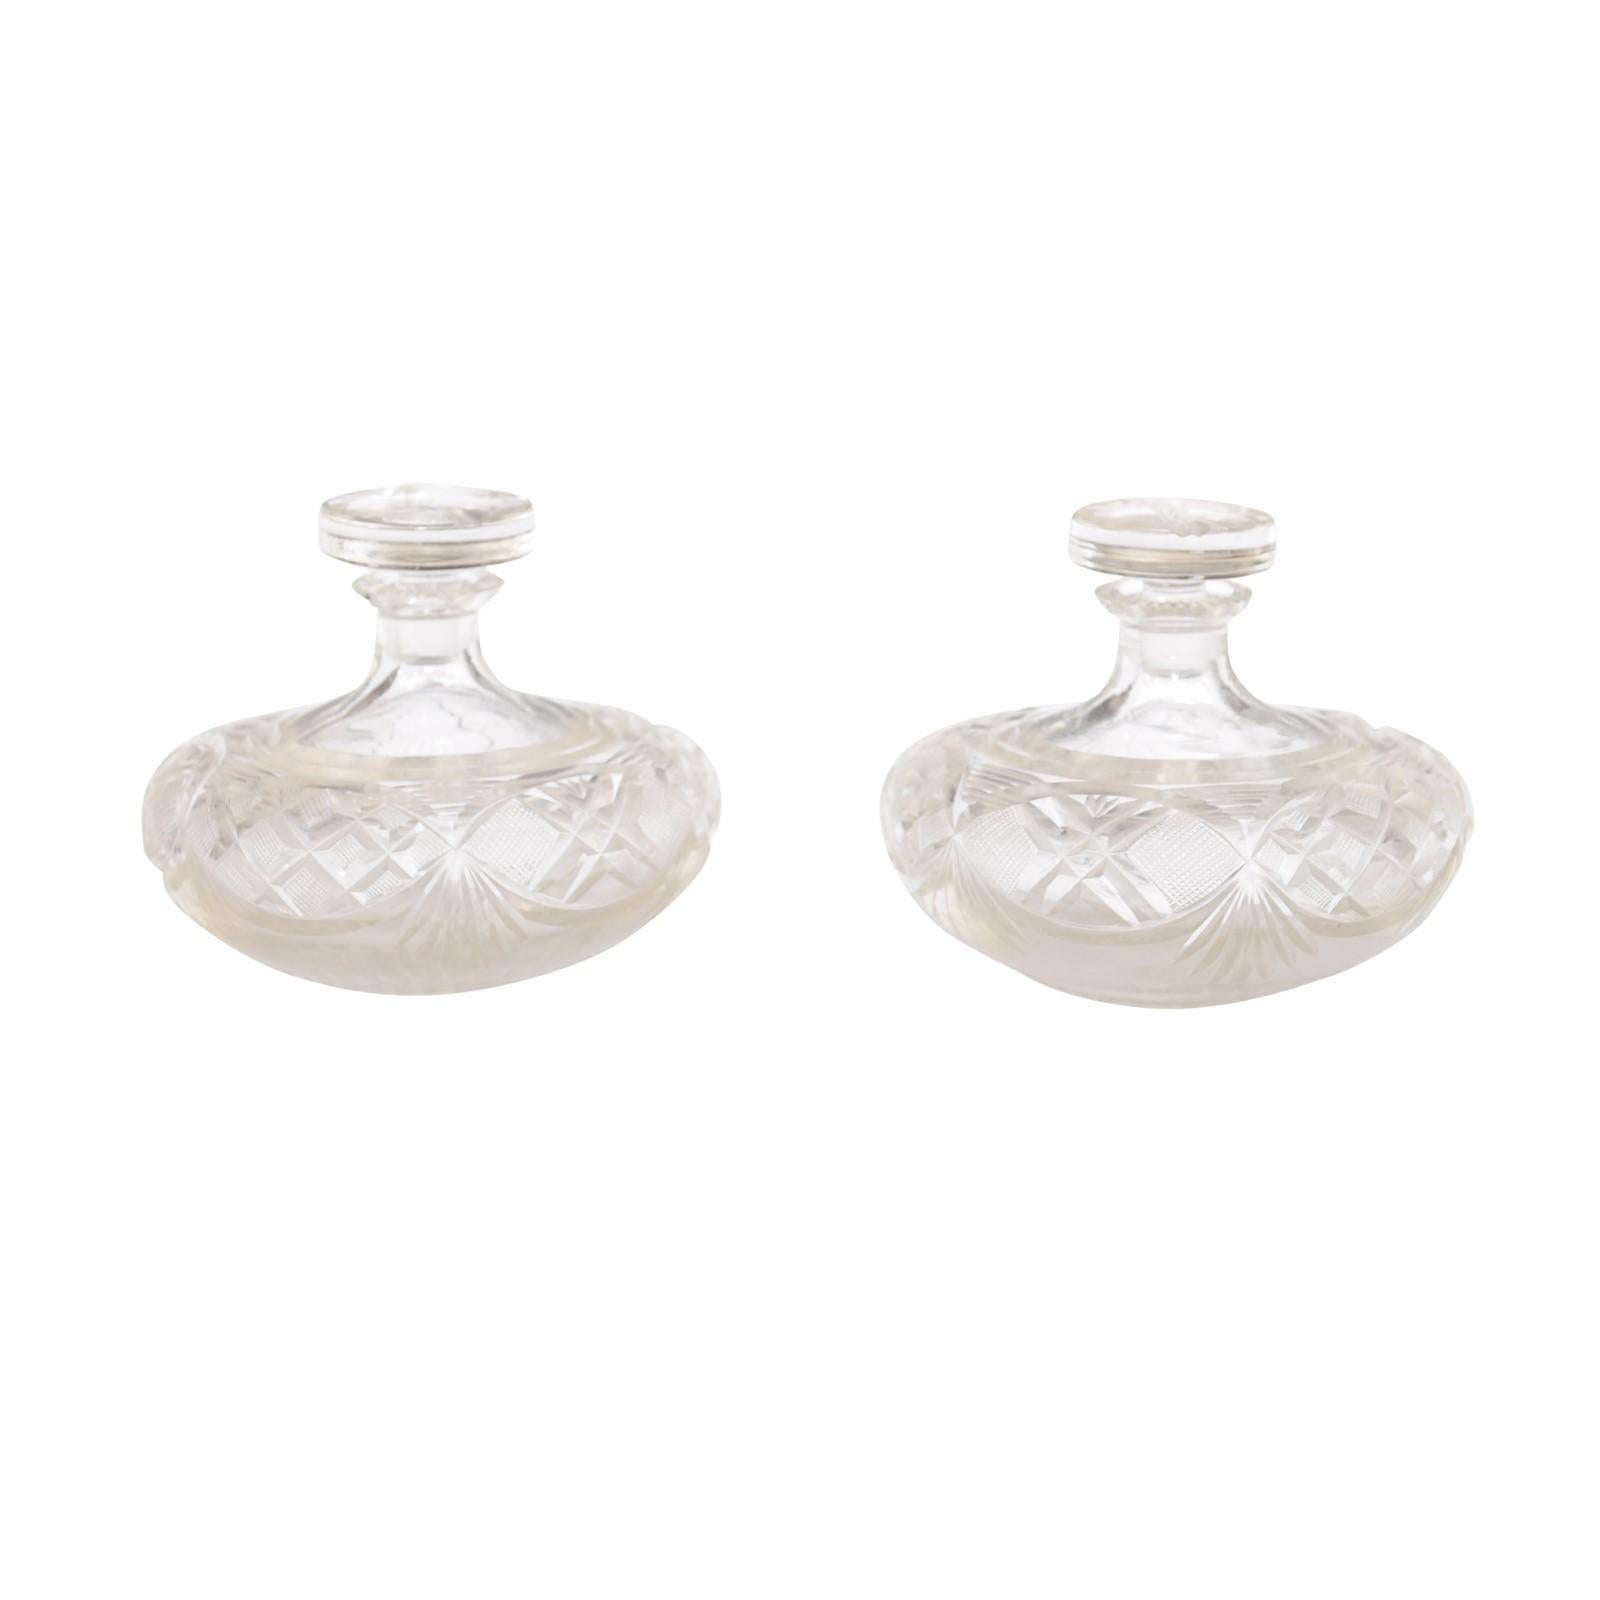 A pair of French Baccarat Crystal perfume bottles from the 19th century with stoppers and cutaway motifs. A pair of French Baccarat Crystal perfume bottles from the 19th century, exuding opulence and timeless elegance with their exquisite cutaway